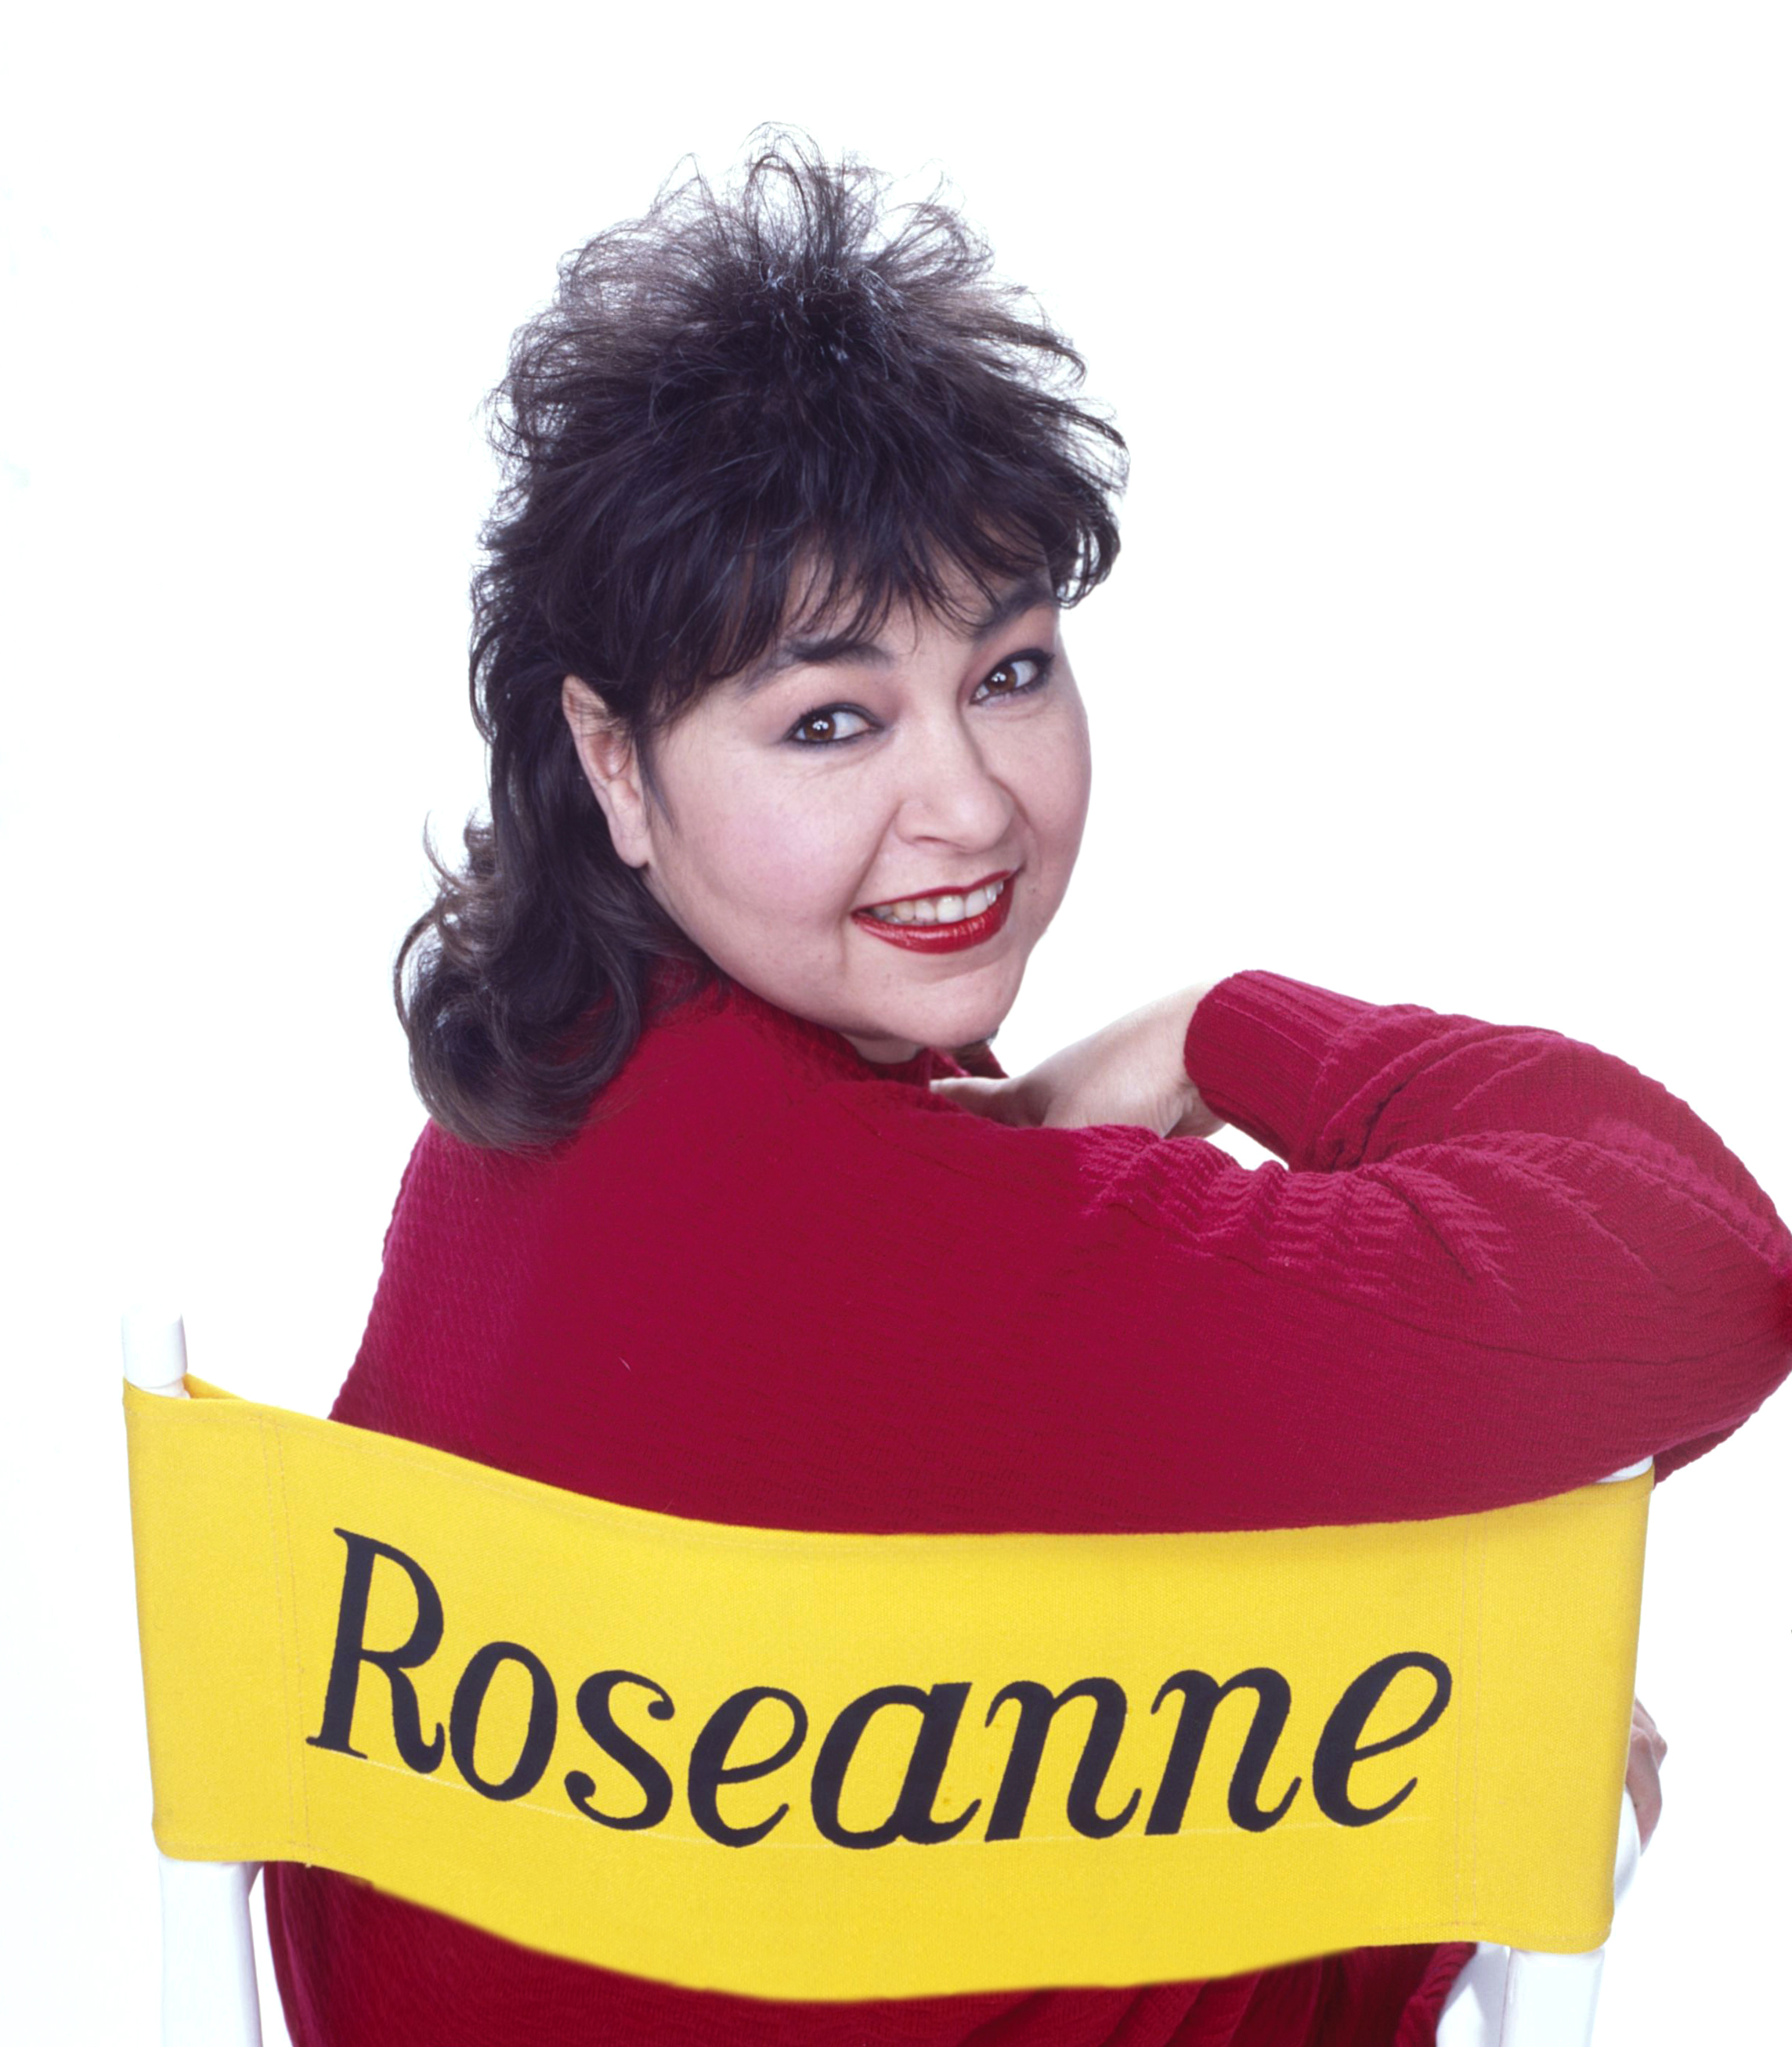 Roseanne Barr poses for a portrait on May 5, 1986 in Los Angeles, California. | Source: Getty Images